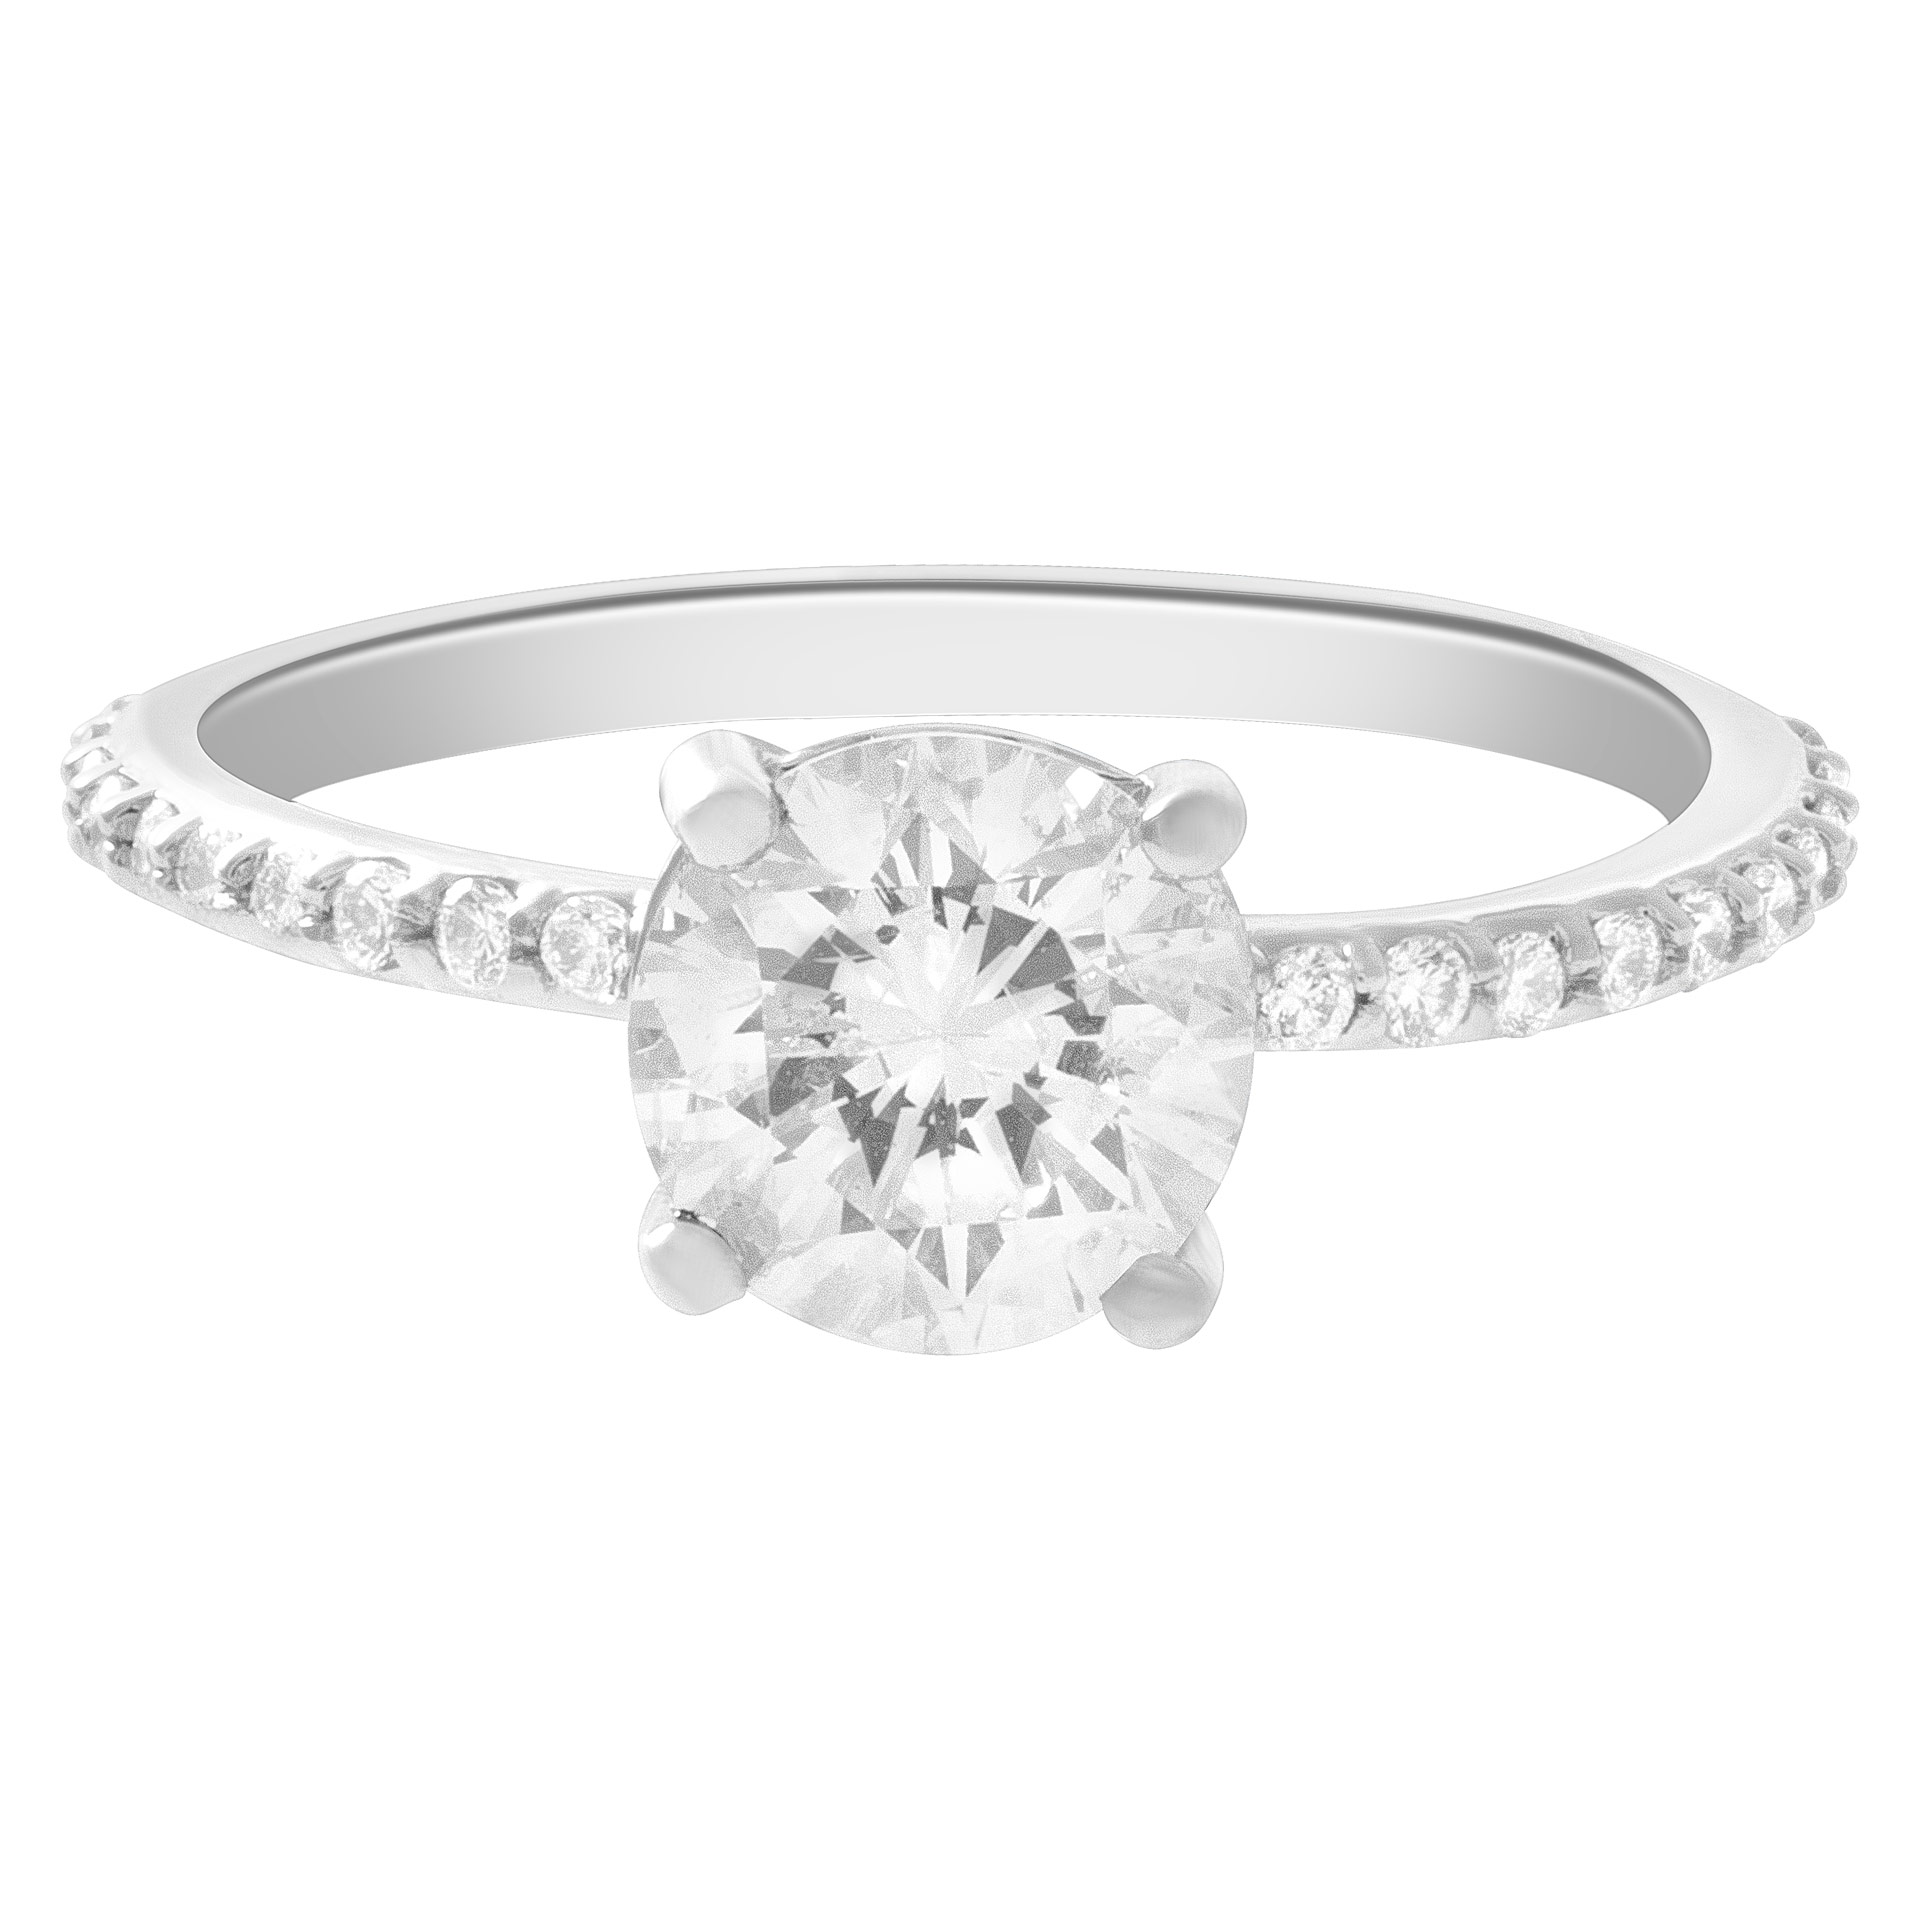 GIA certified round brilliant diamond 1.53 carats (F color, I1 clarity) ring set in platinum.